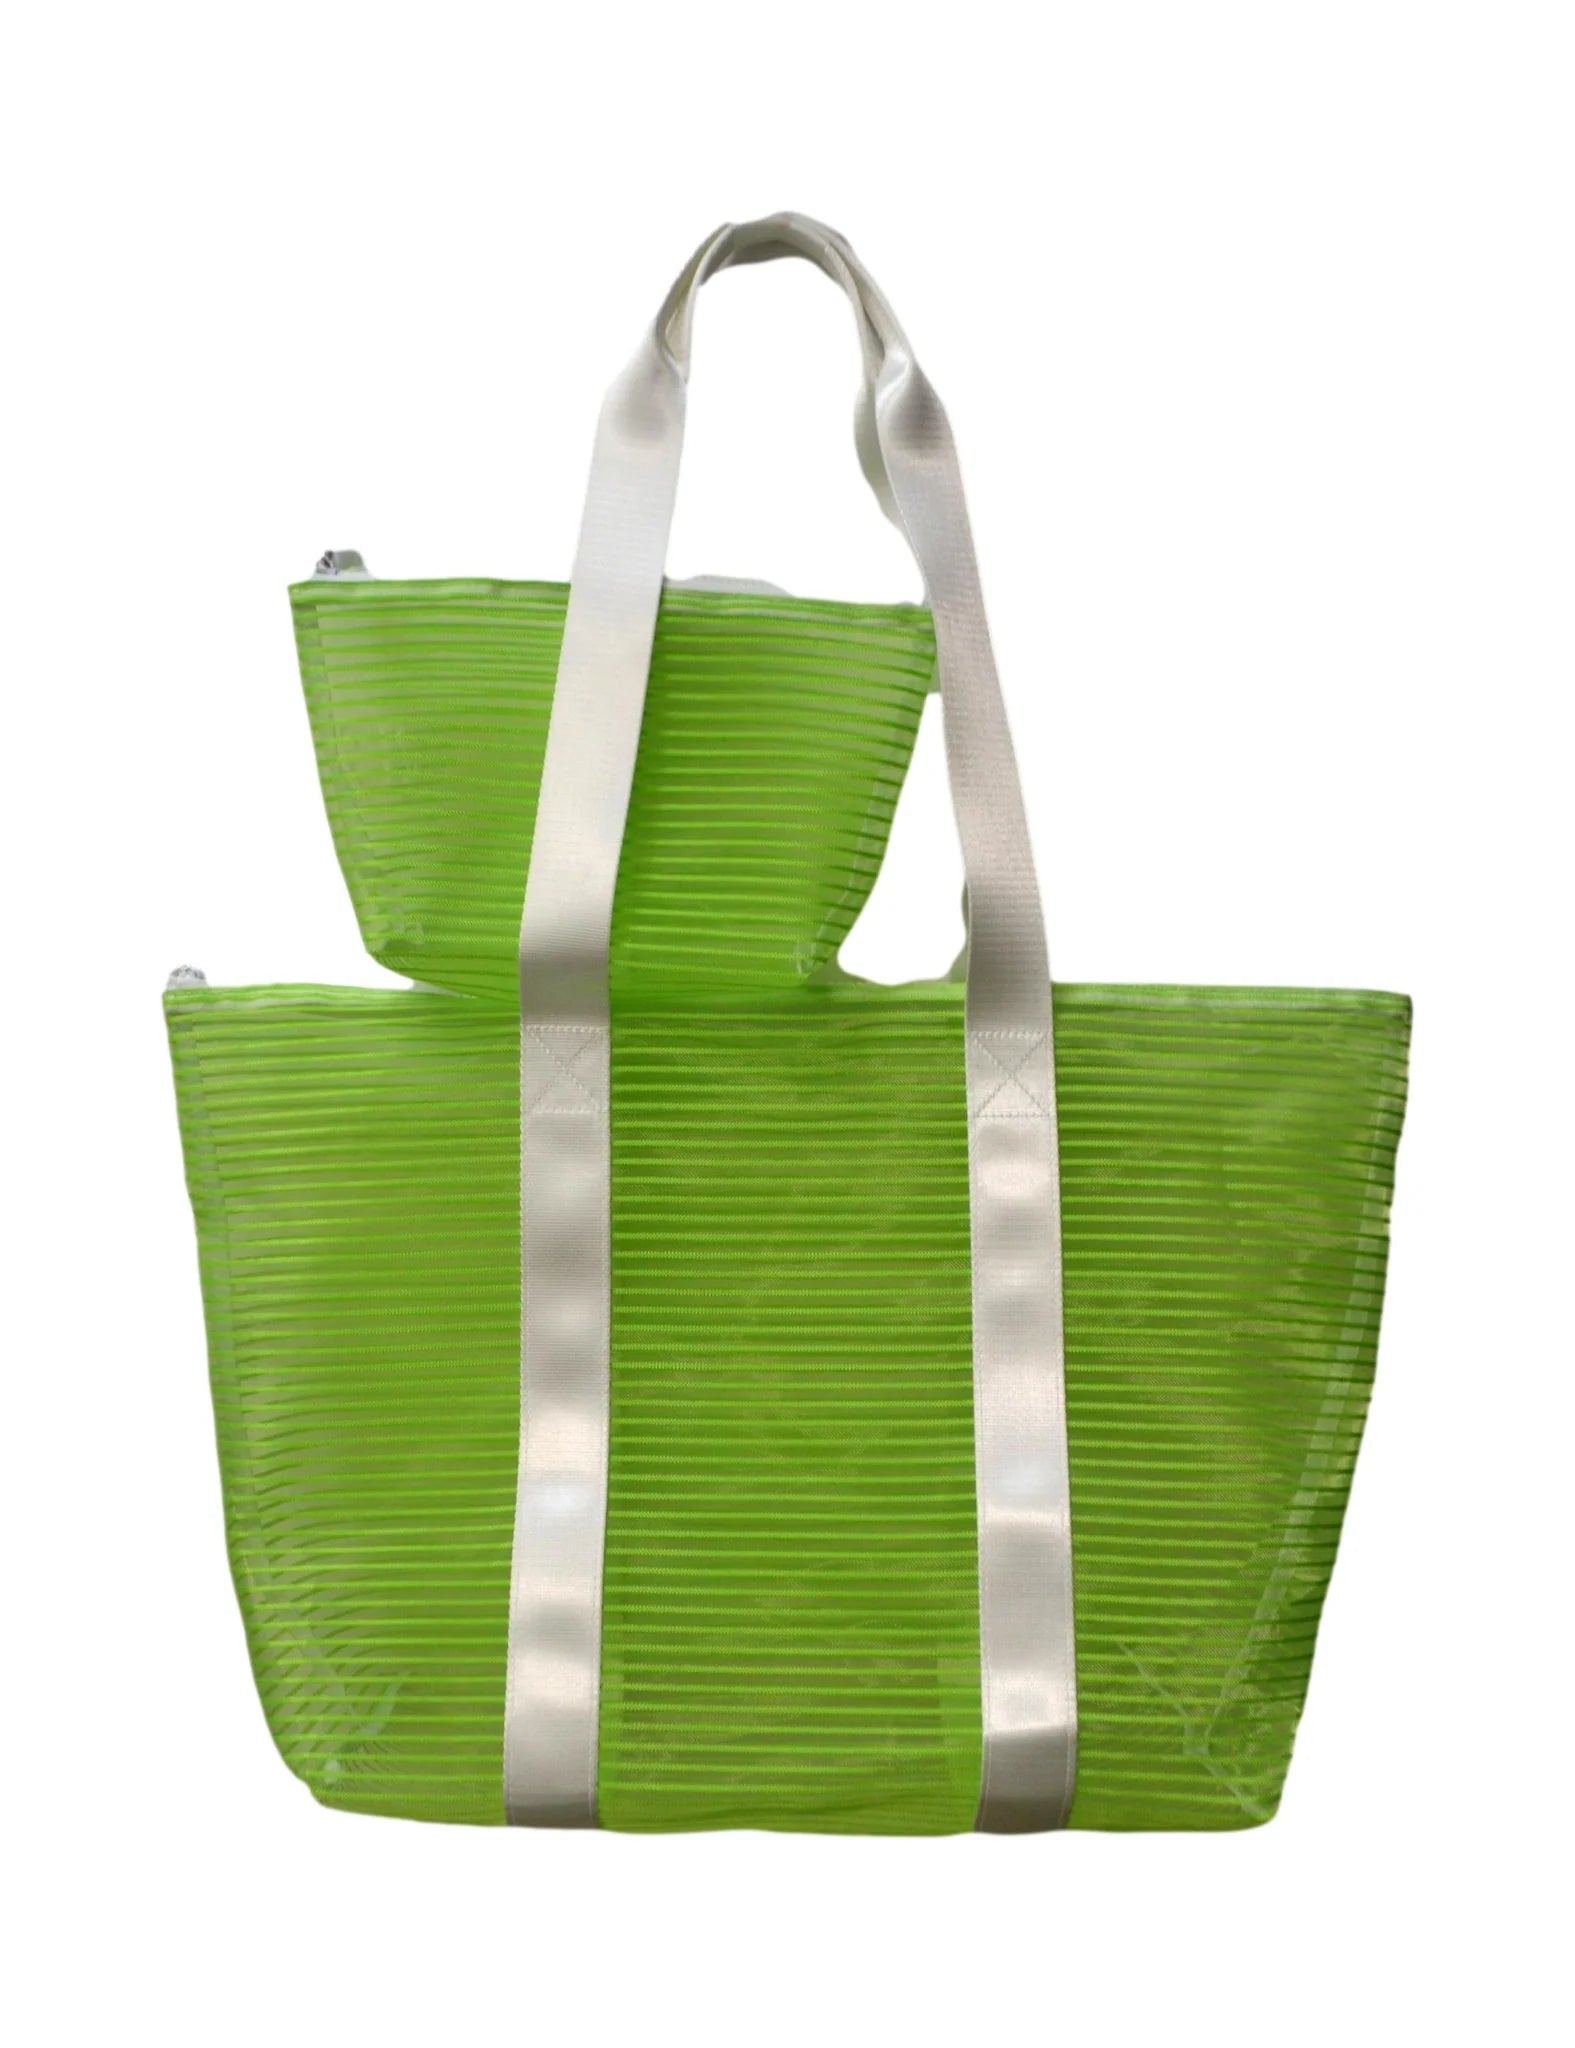 Mesh Neon Tote with Pouch - Sadie's Stitchery